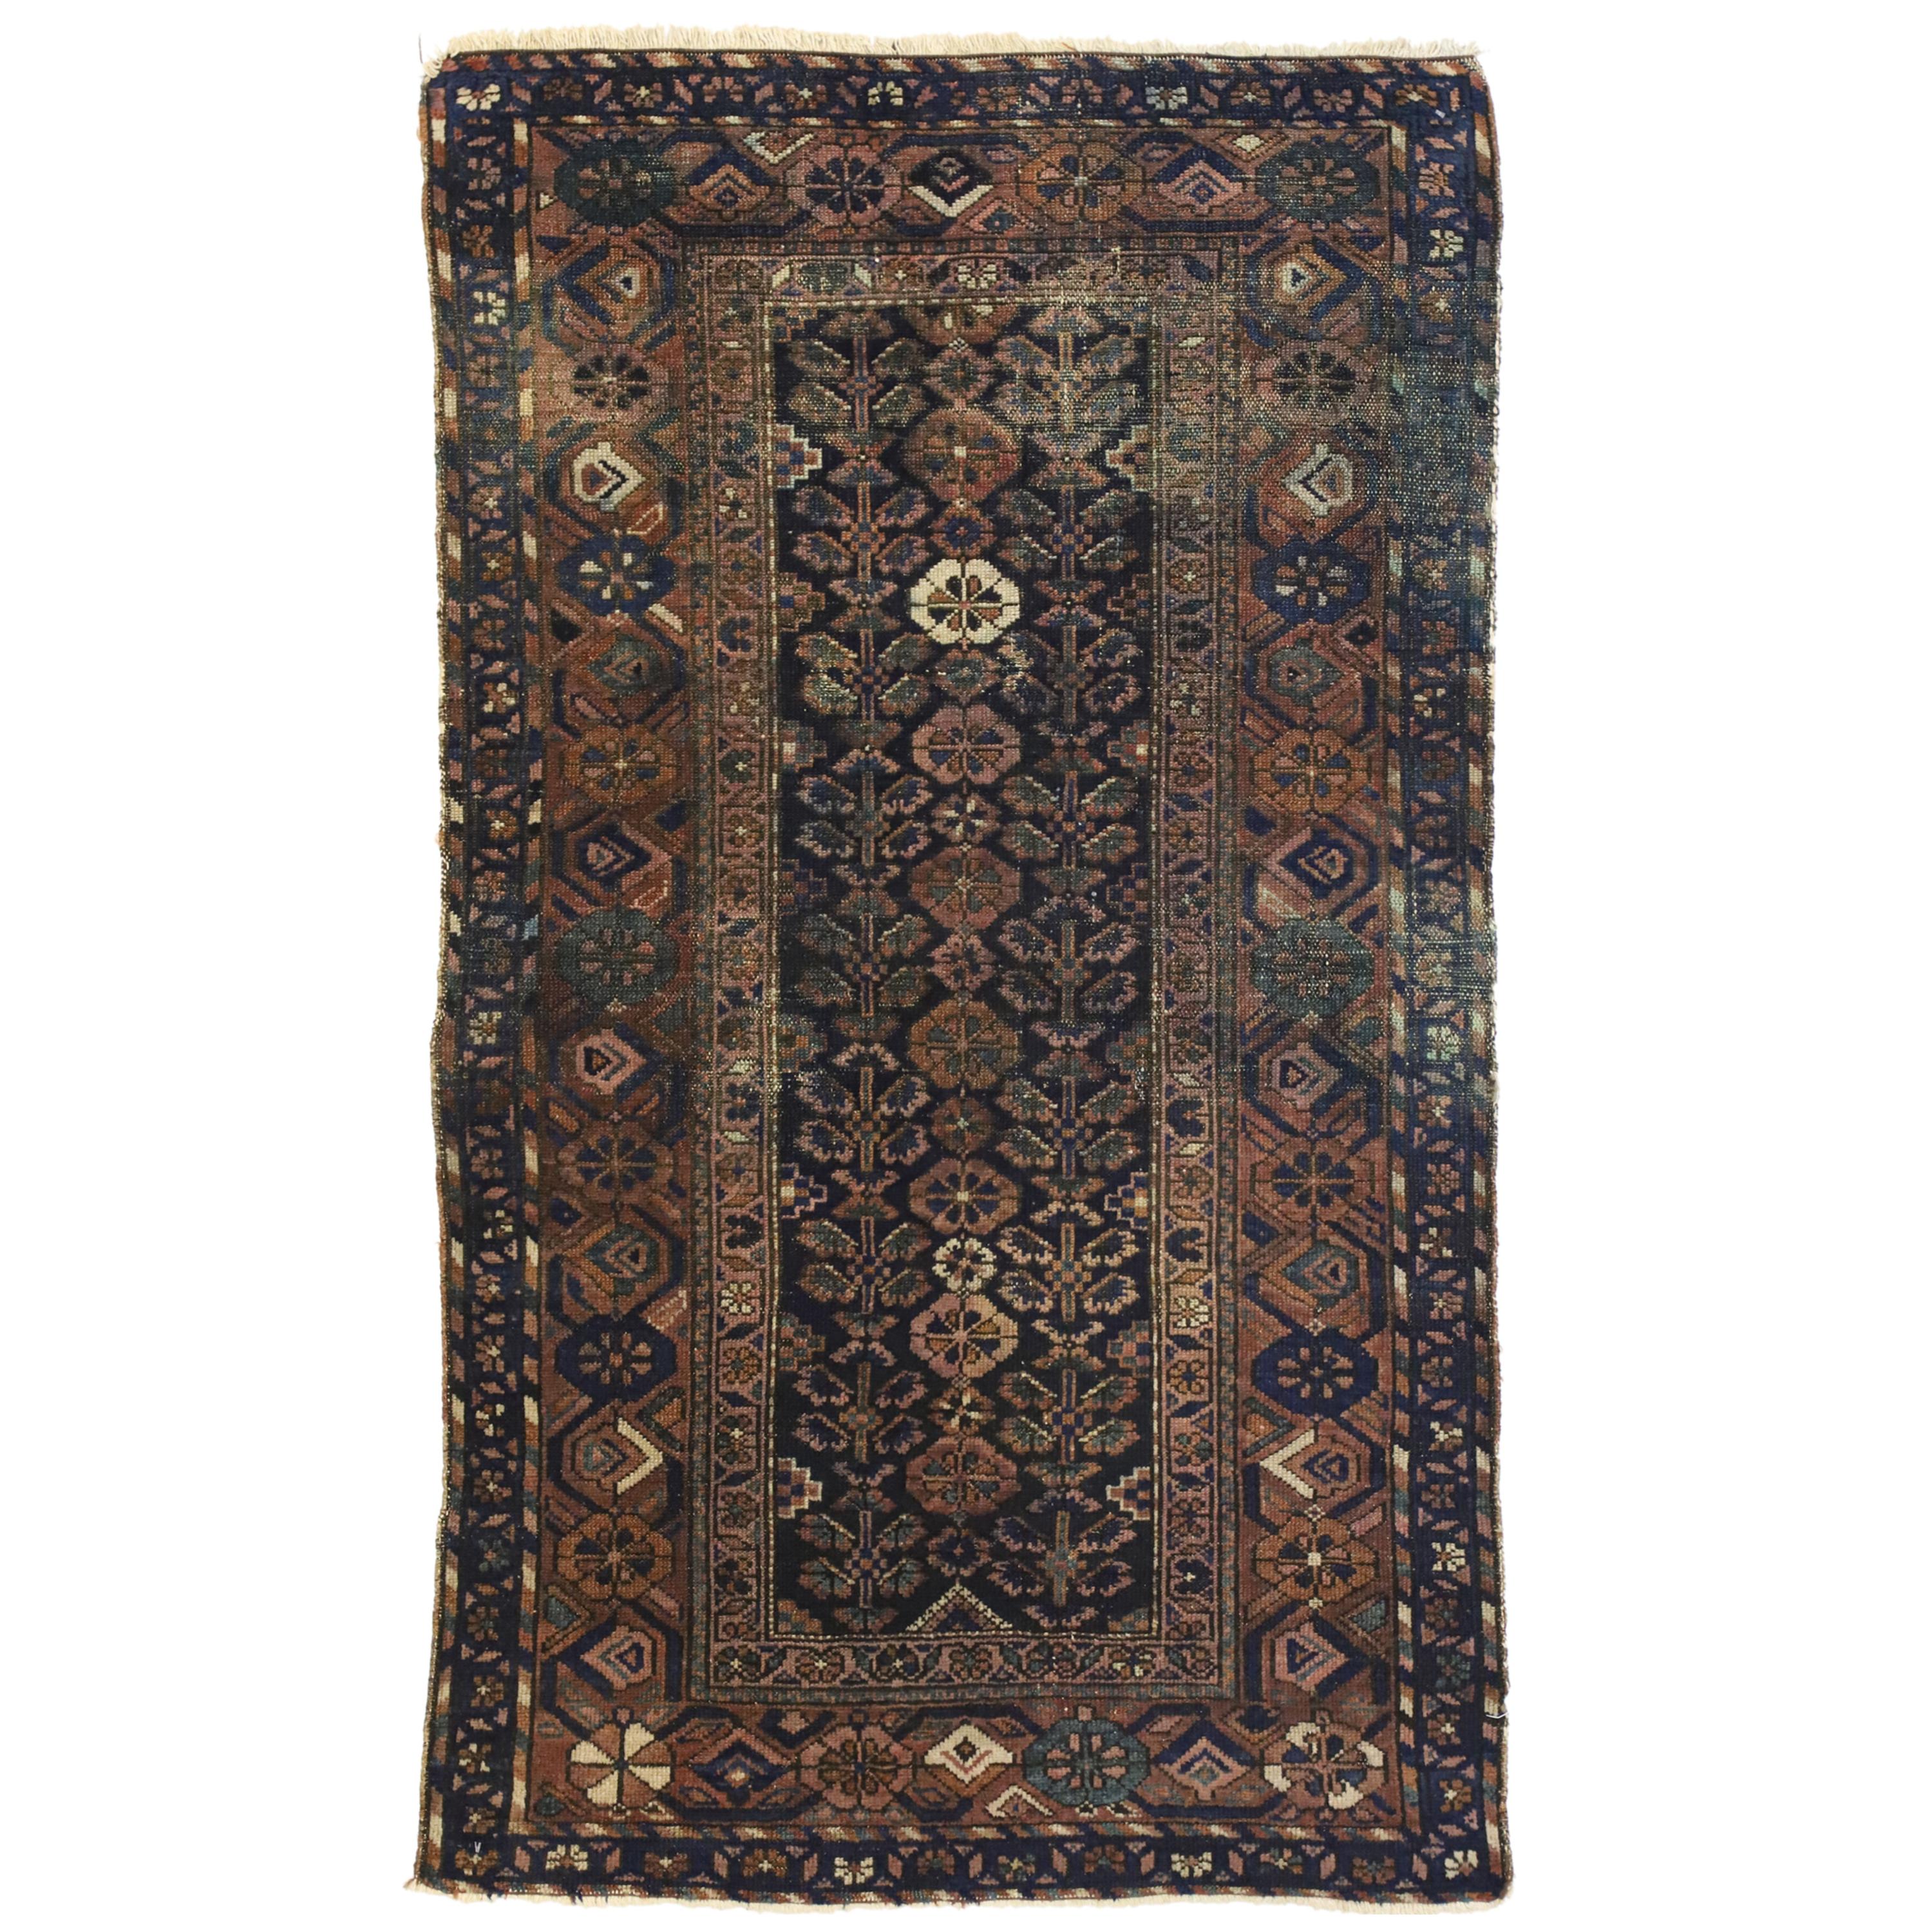 Worn-In Distressed Antique Persian Hamadan Accent Rug with Modern Rustic Style